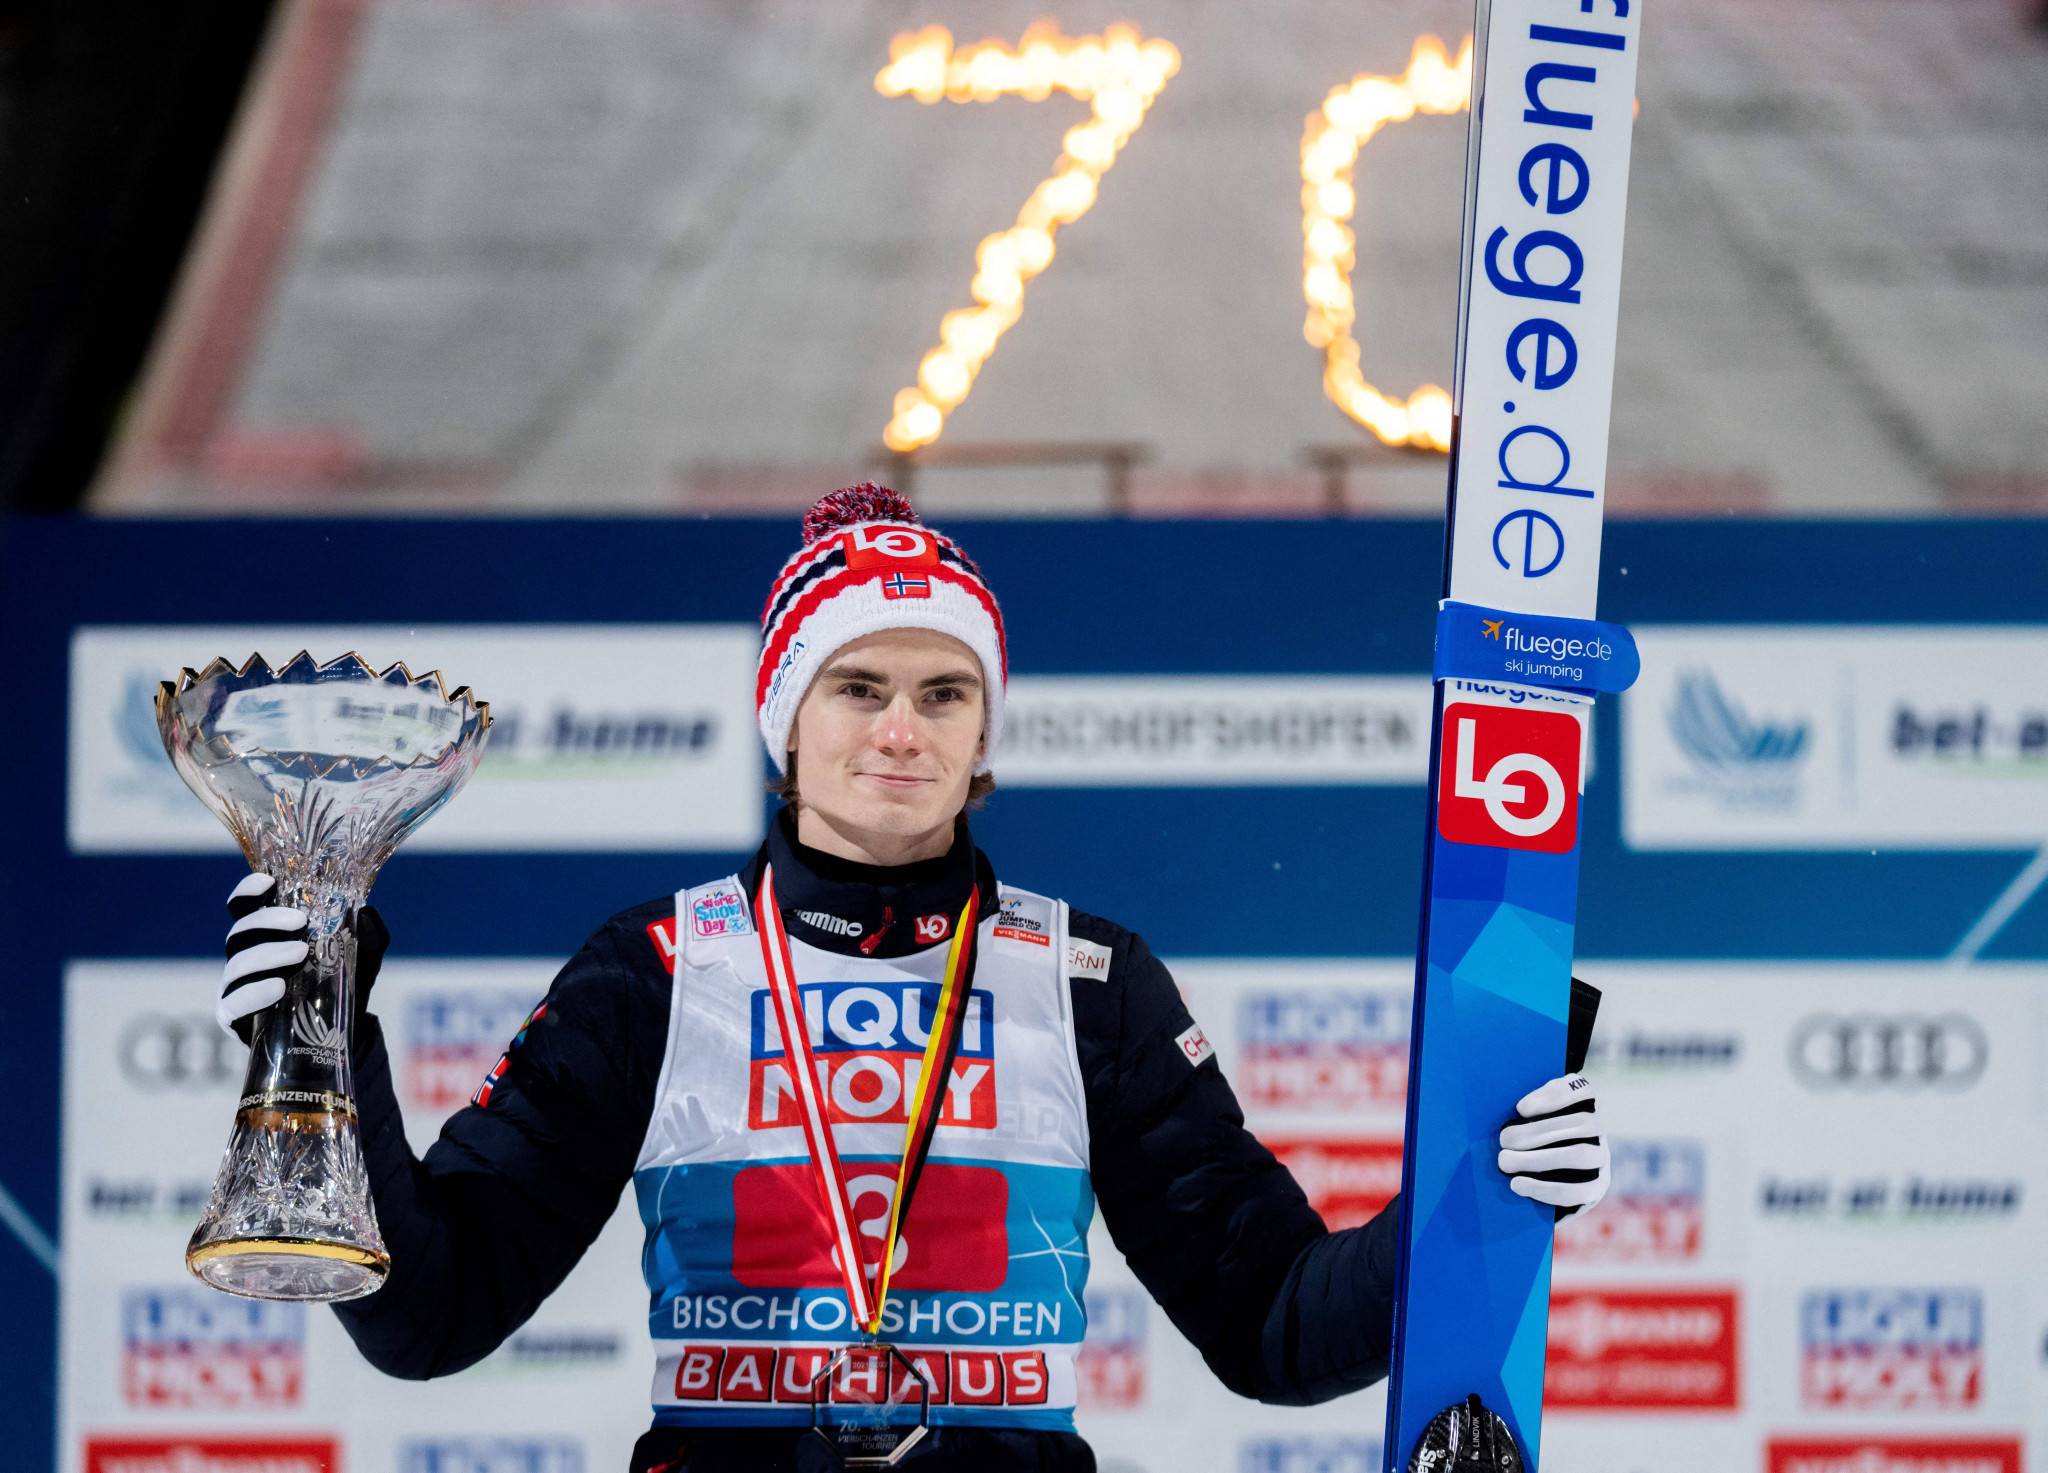 Marius Lindvik secured gold at the FIS Ski Jumping World Cup in Bischofshofen ©Getty Images